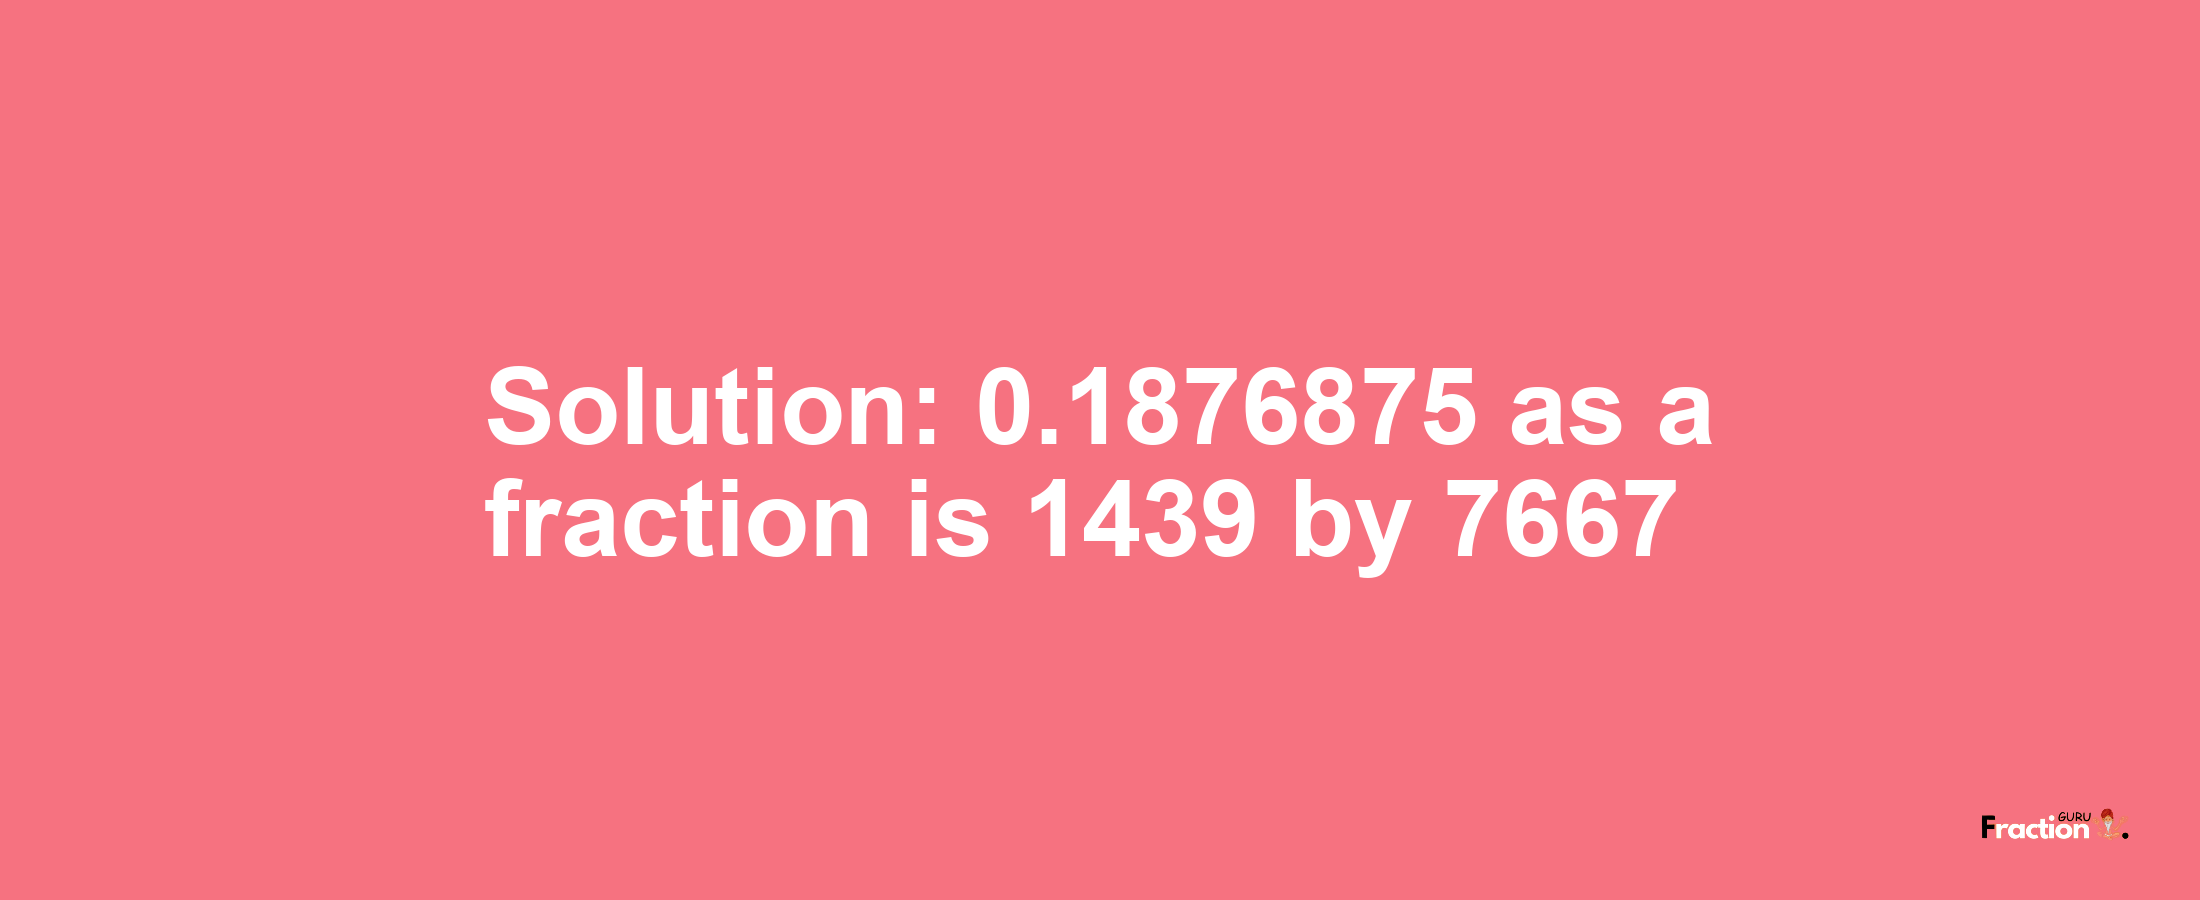 Solution:0.1876875 as a fraction is 1439/7667